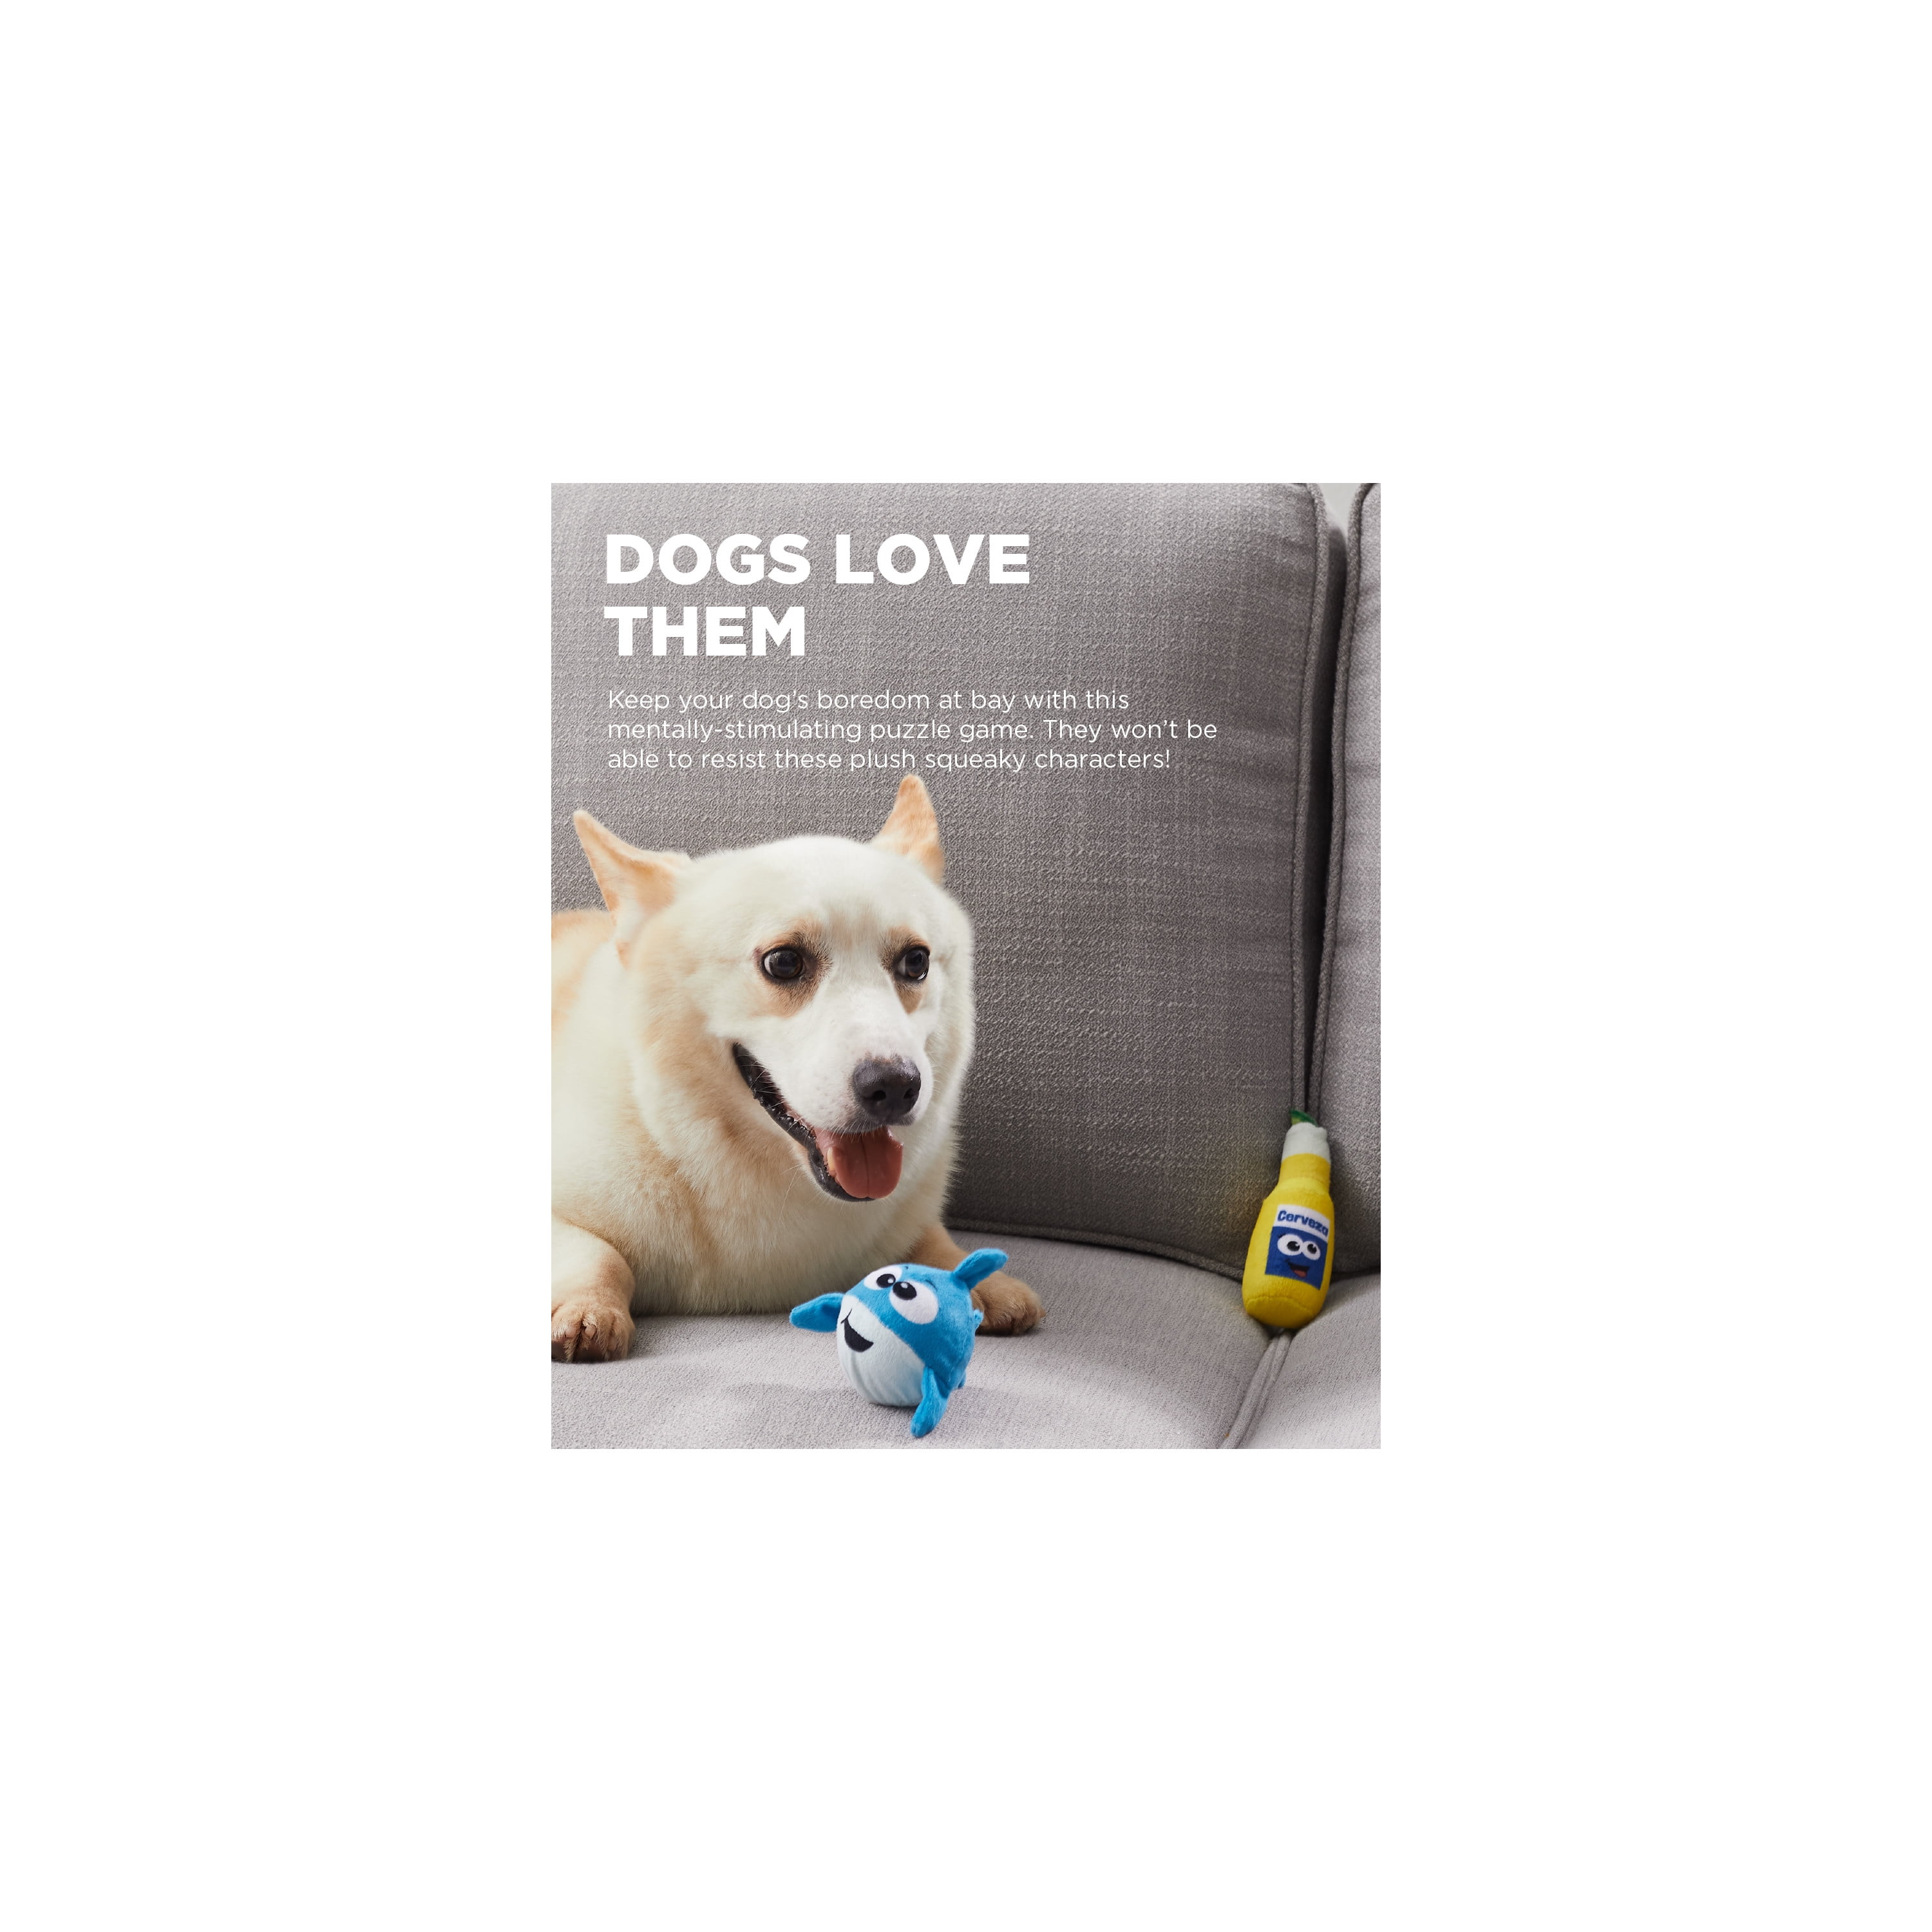 Toys and games for you and your blind dog - DogTime